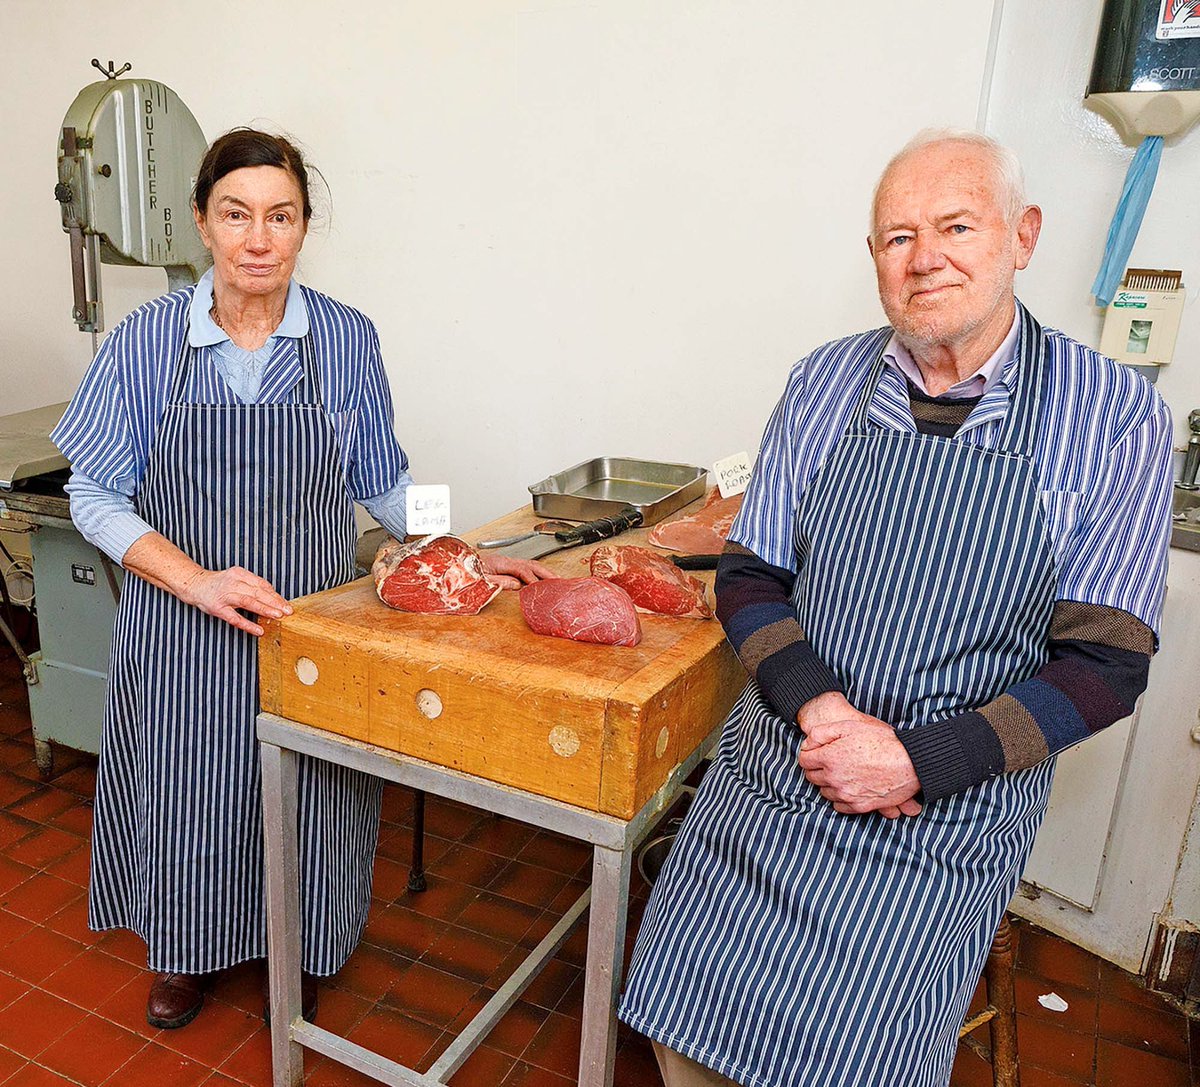 That the local family-run shop is now a dying breed was hammered home in North Kerry this week when the last butchers in Ballylongford shut its doors for the final time, drawing to a close a tradition of filling local dinner plates that stretches back nearly 100 years.